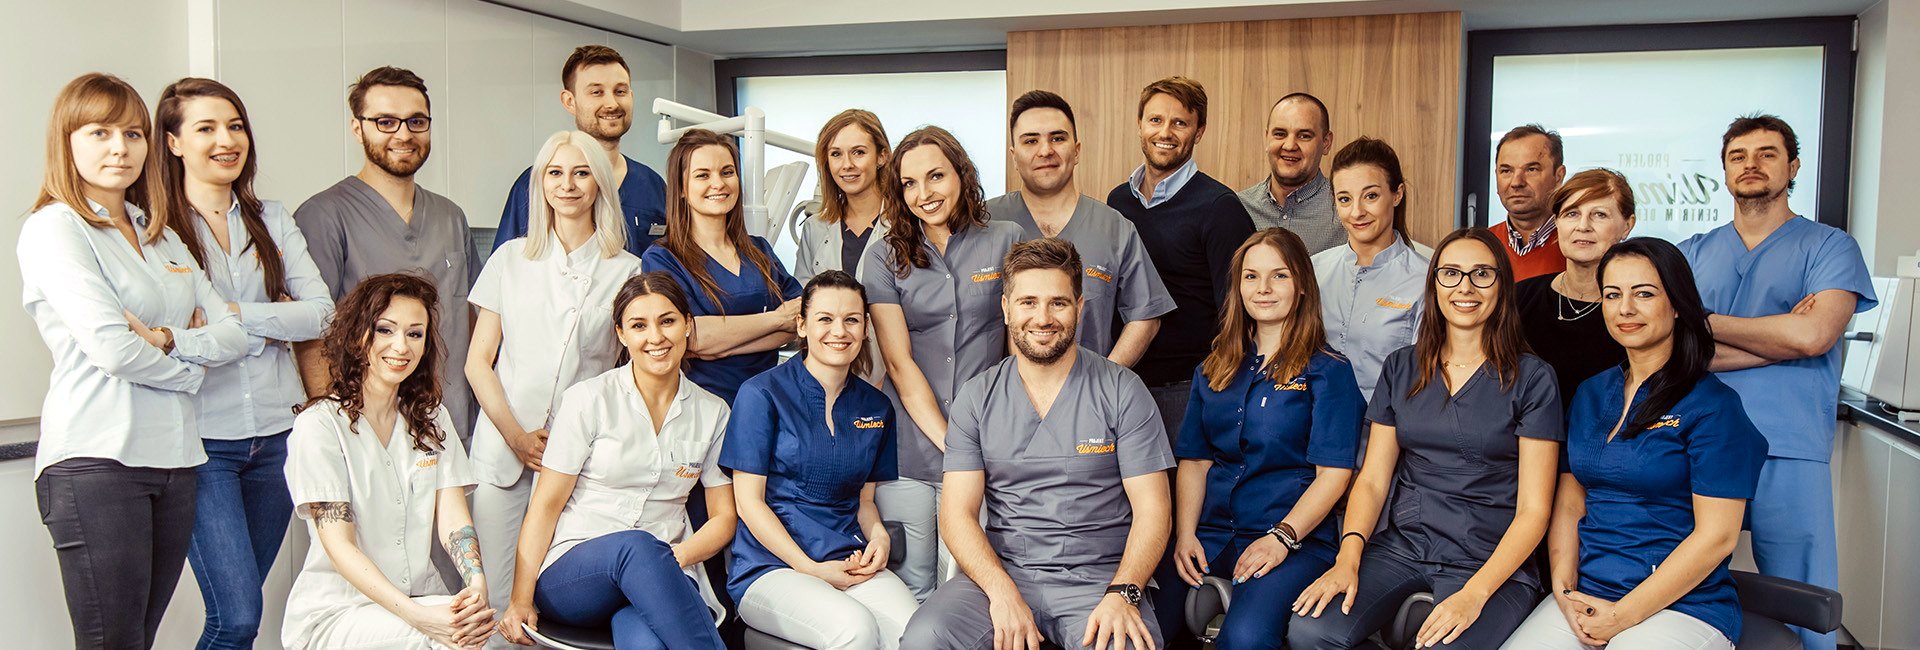 Project Smile Dental Clinic Team